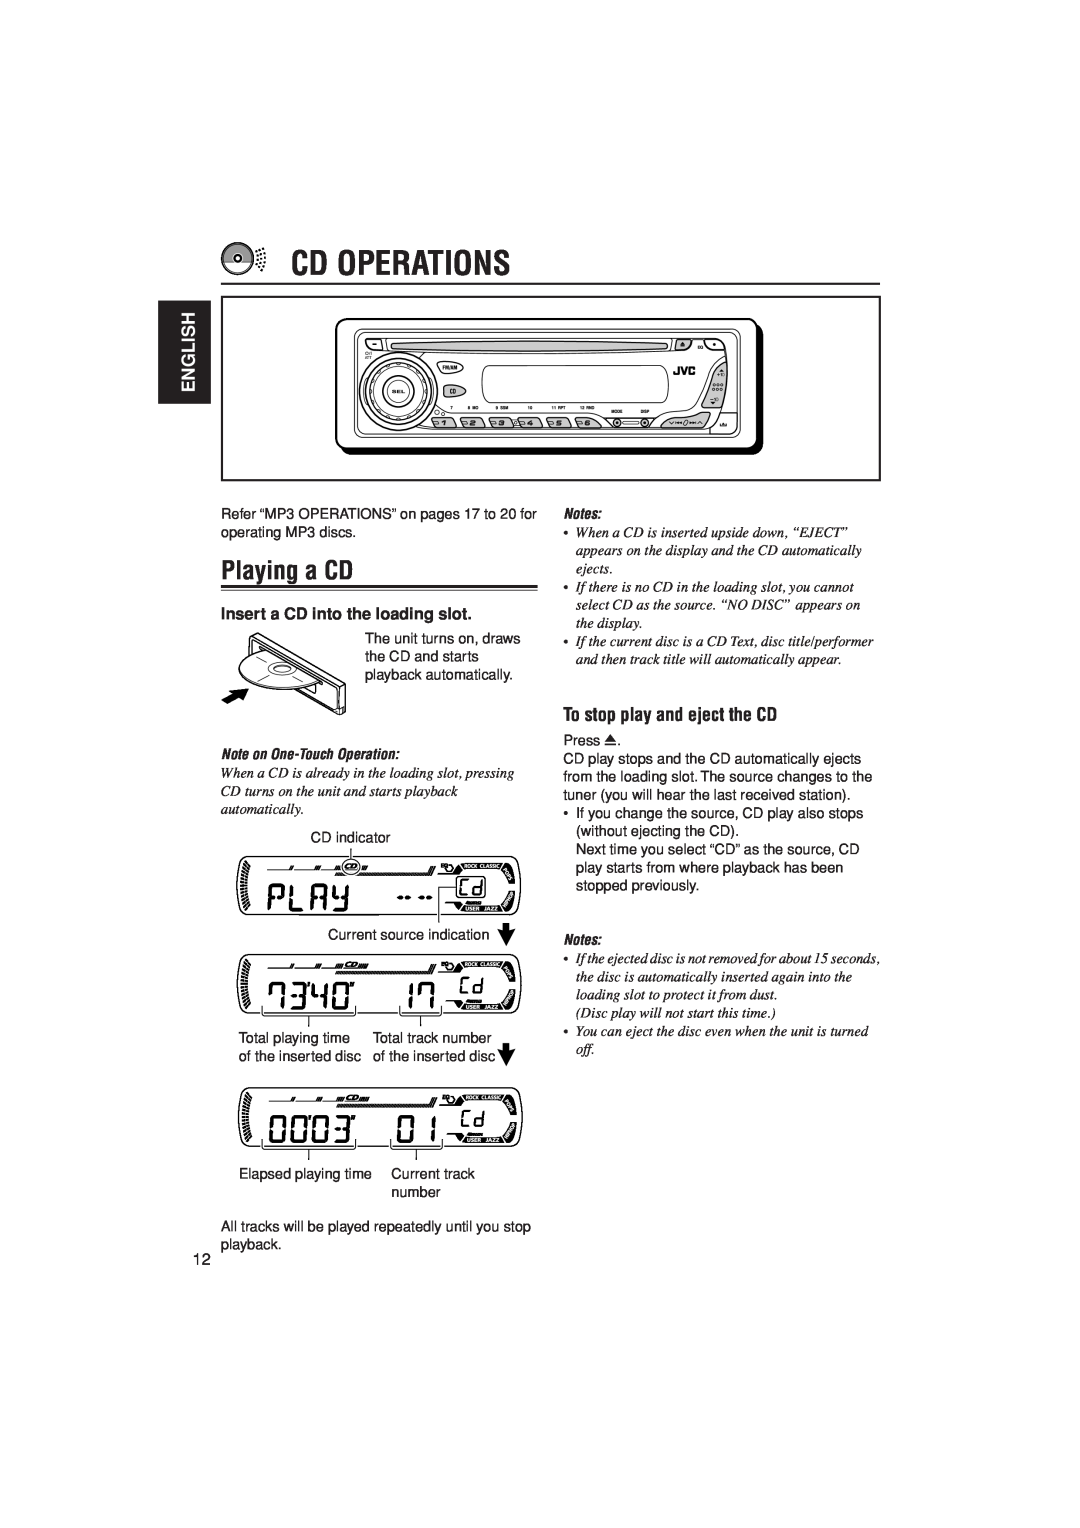 JVC KD-G407 manual Cd Operations, Playing a CD, To stop play and eject the CD, English, Insert a CD into the loading slot 